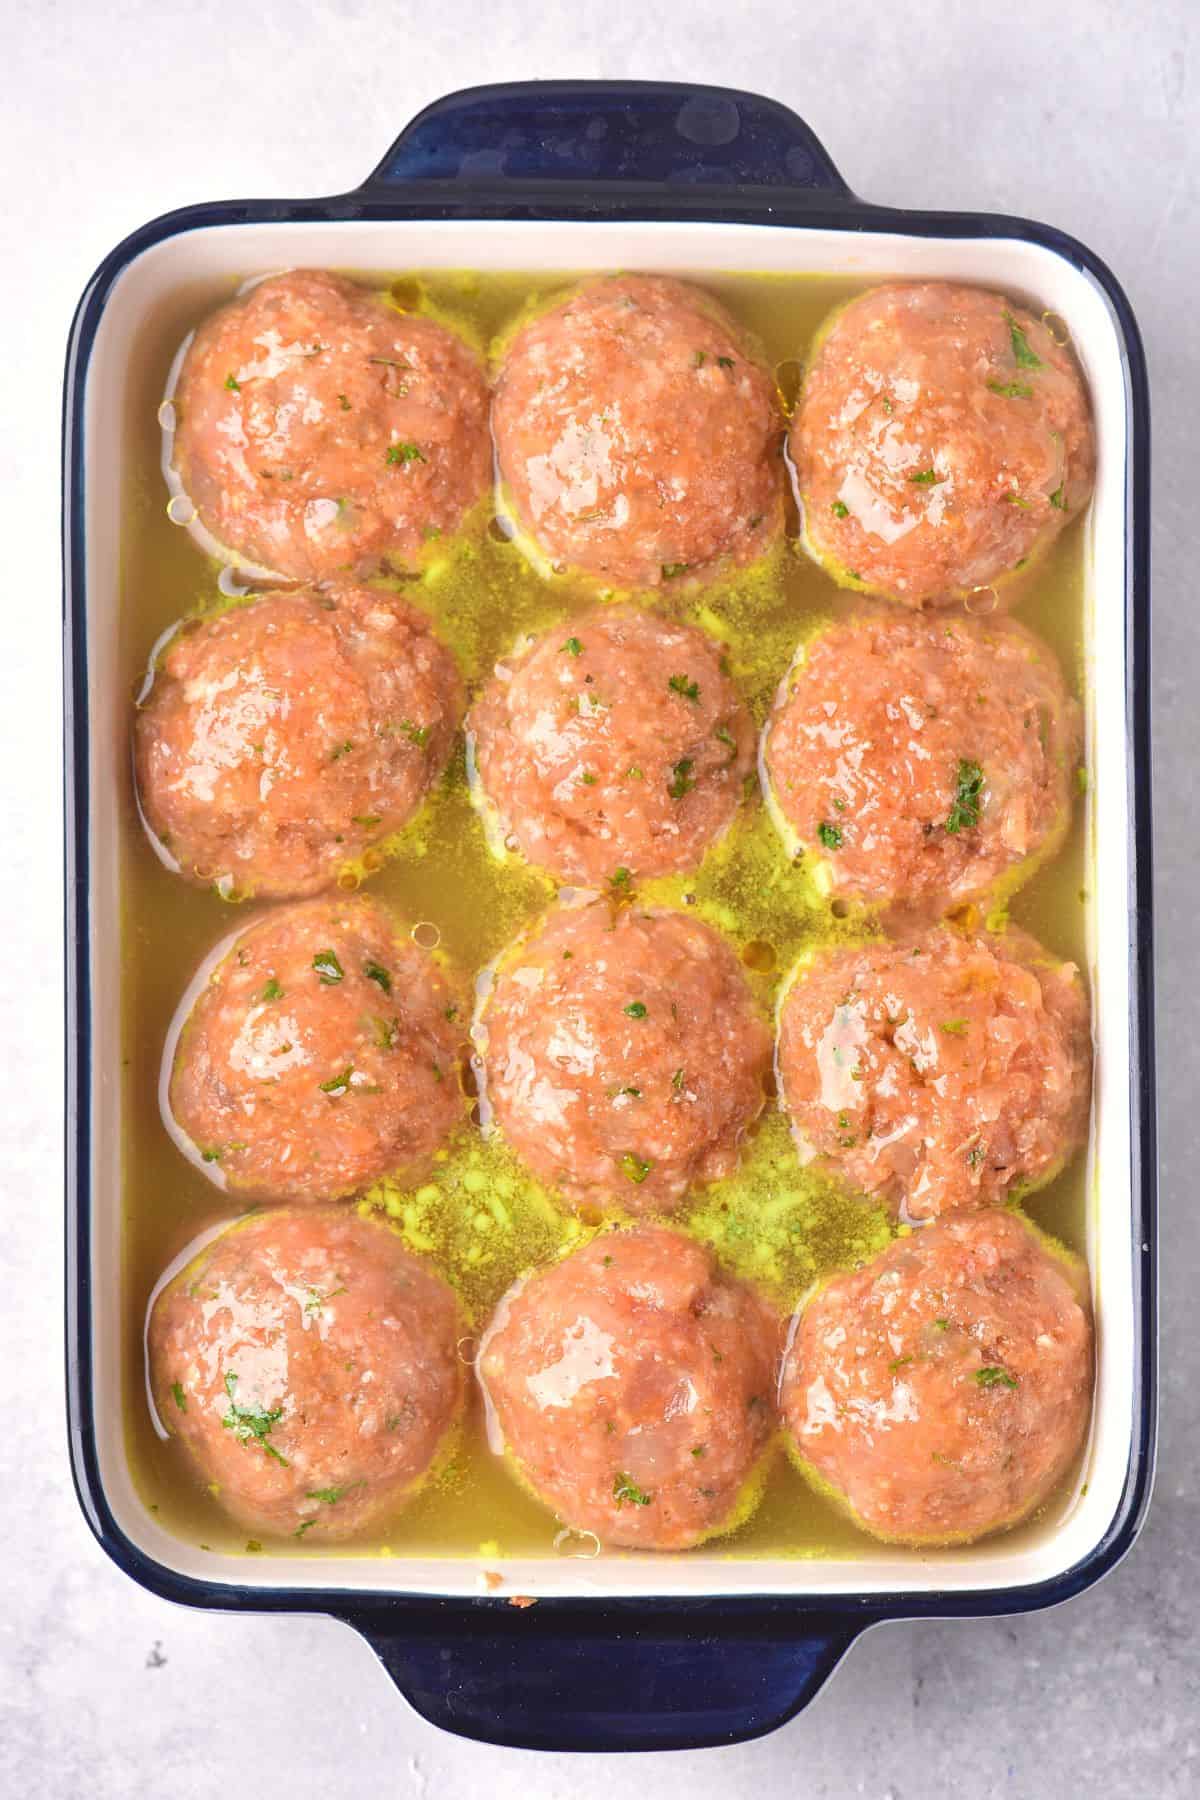 Uncooked chicken balls in broth in a baking dish.